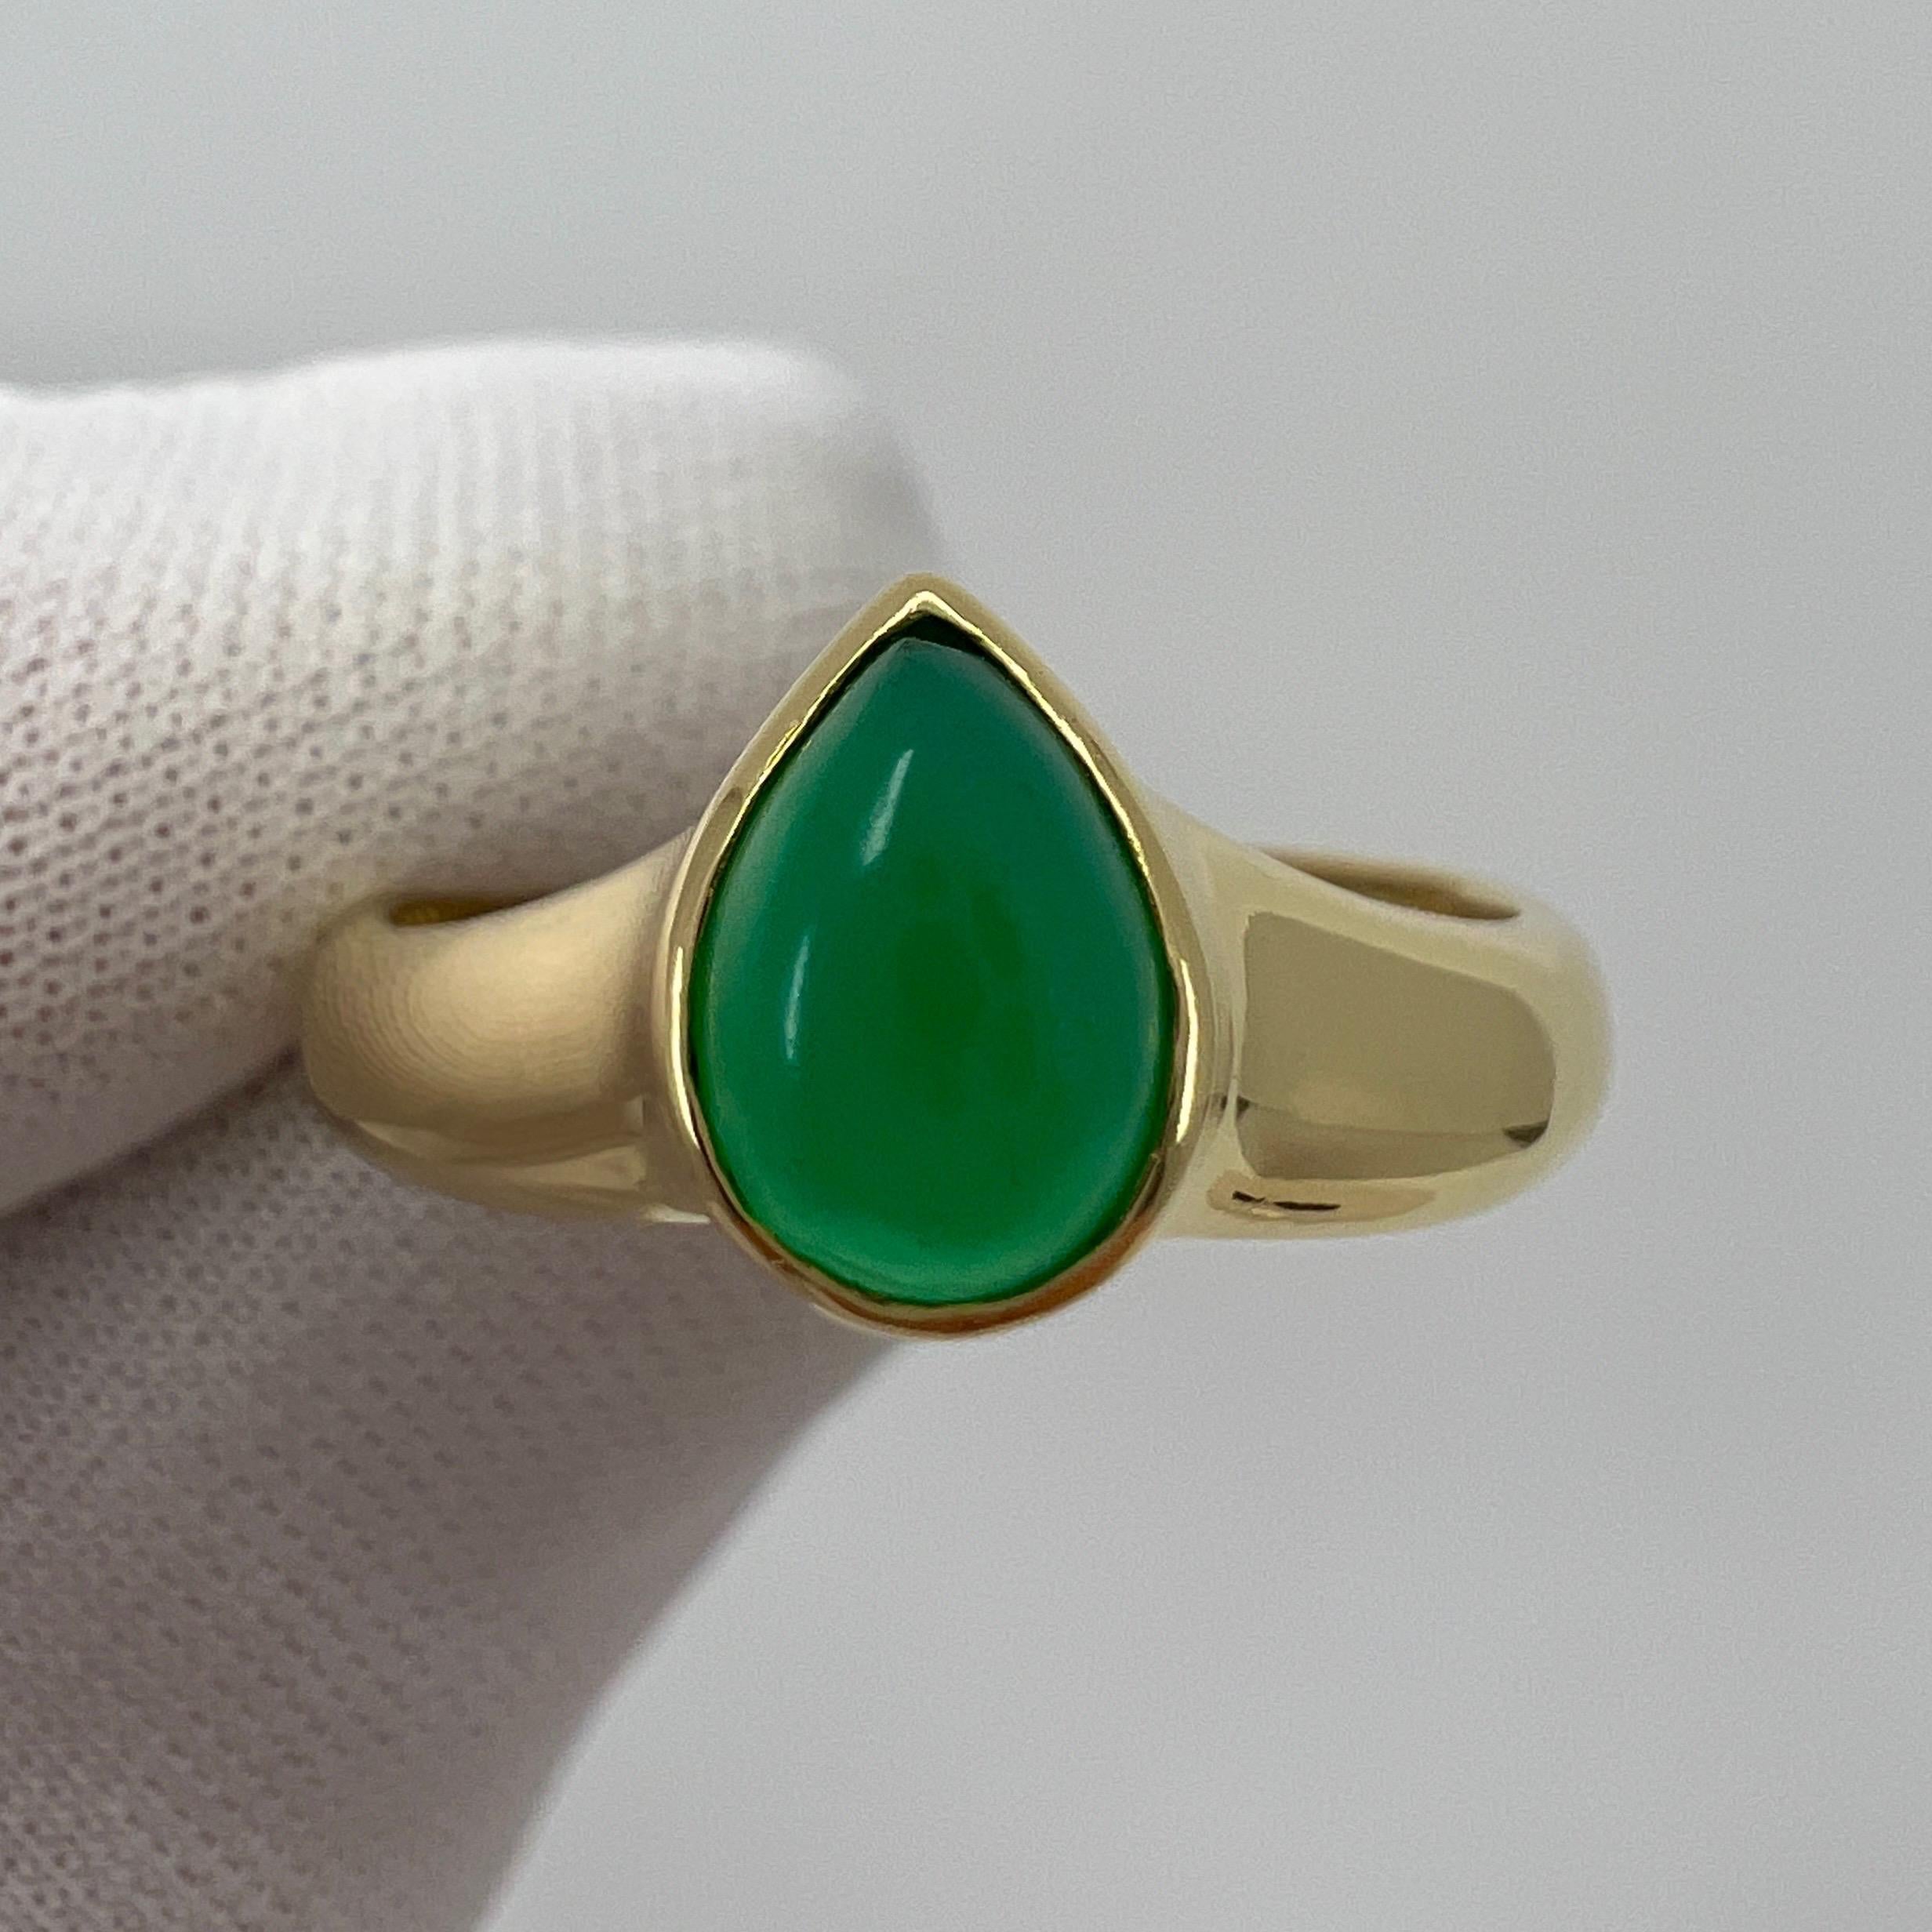 Rare Vintage Van Cleef & Arpels Green Chalcedony Agate Pear Cut 18k Yellow Gold Ring.

A stunning vintage Van Cleef & Arpels ring with a beautiful, top grade chalcedony agate with a glowing green colour and excellent clarity. Some of the finest